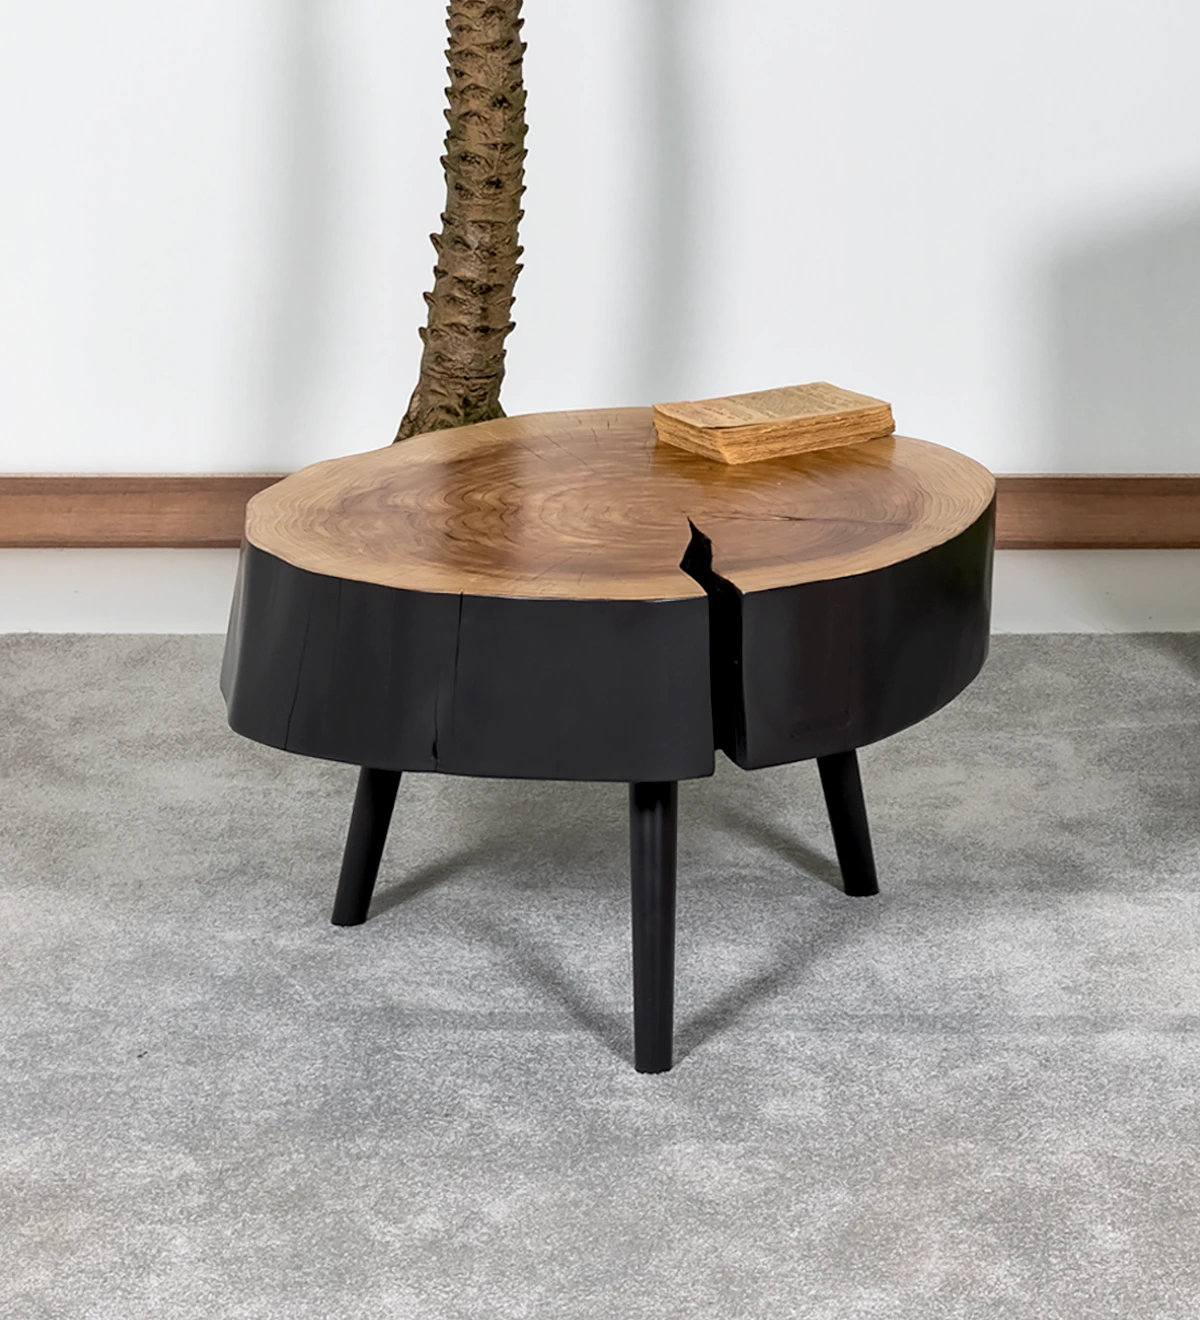 Trunk center table in natural black lacquered cryptomeria wood, with 3 black lacquered feet